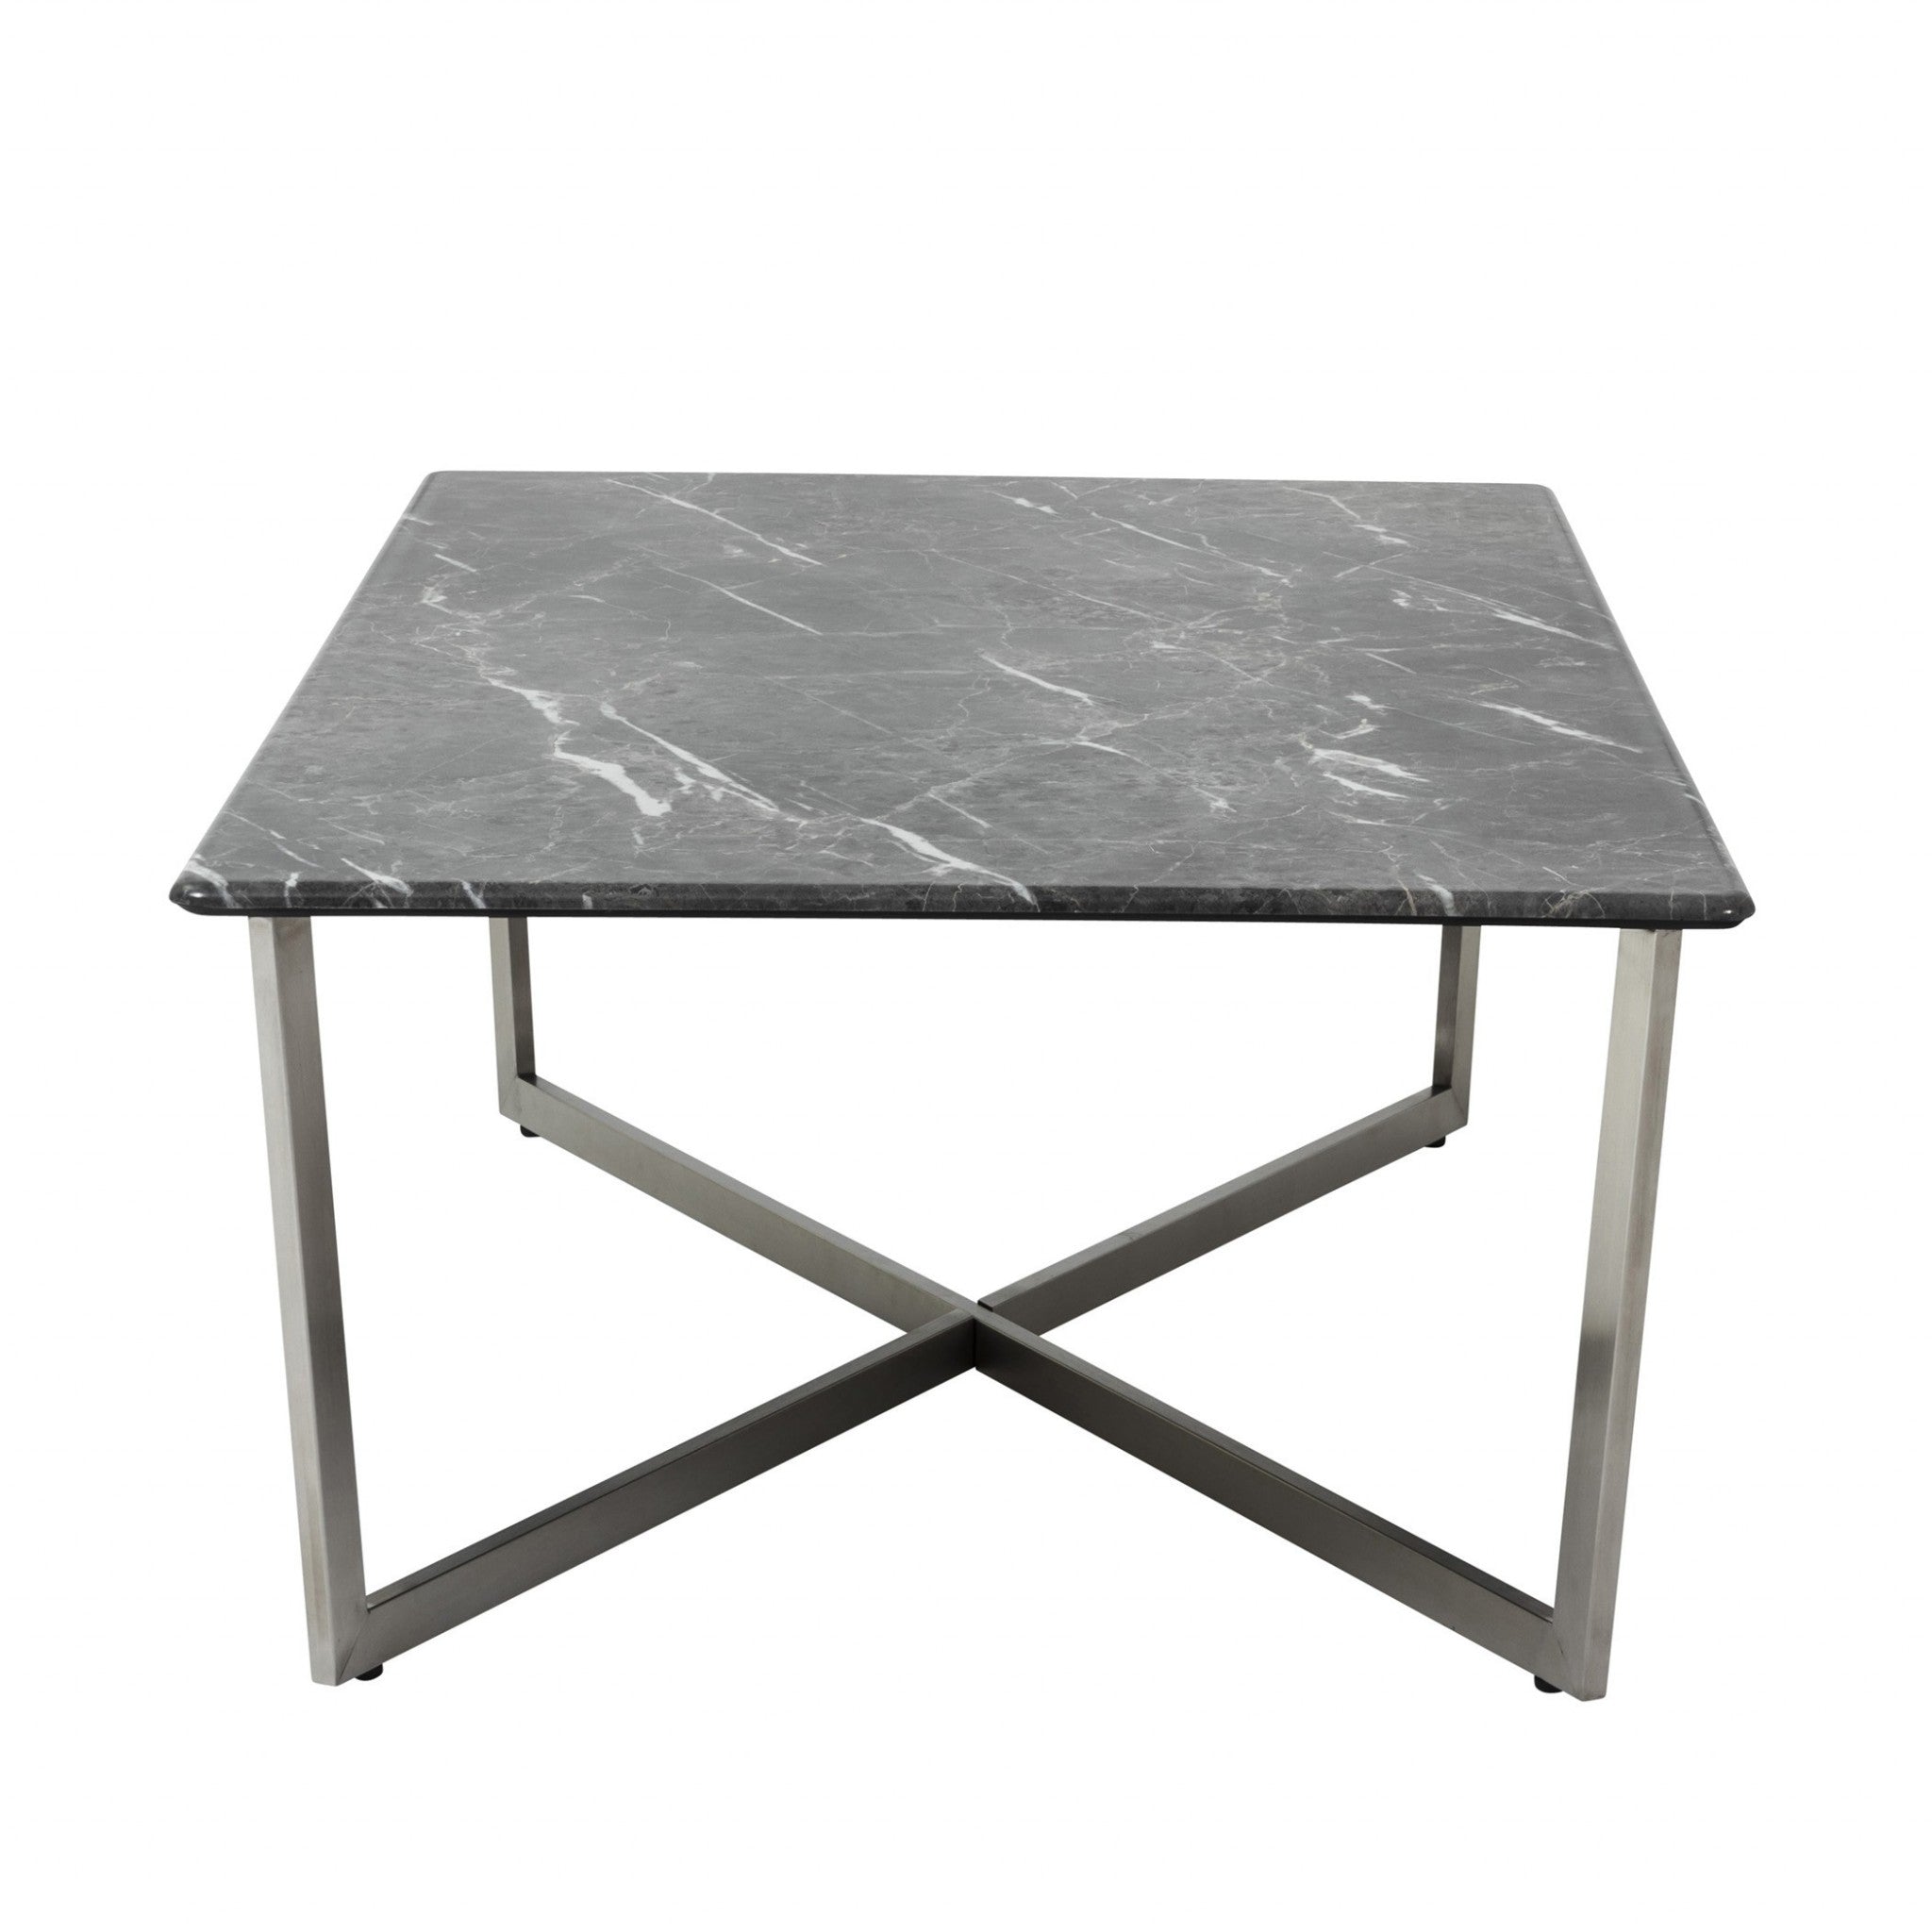 47" Black And Silver Faux Marble Rectangular Coffee Table